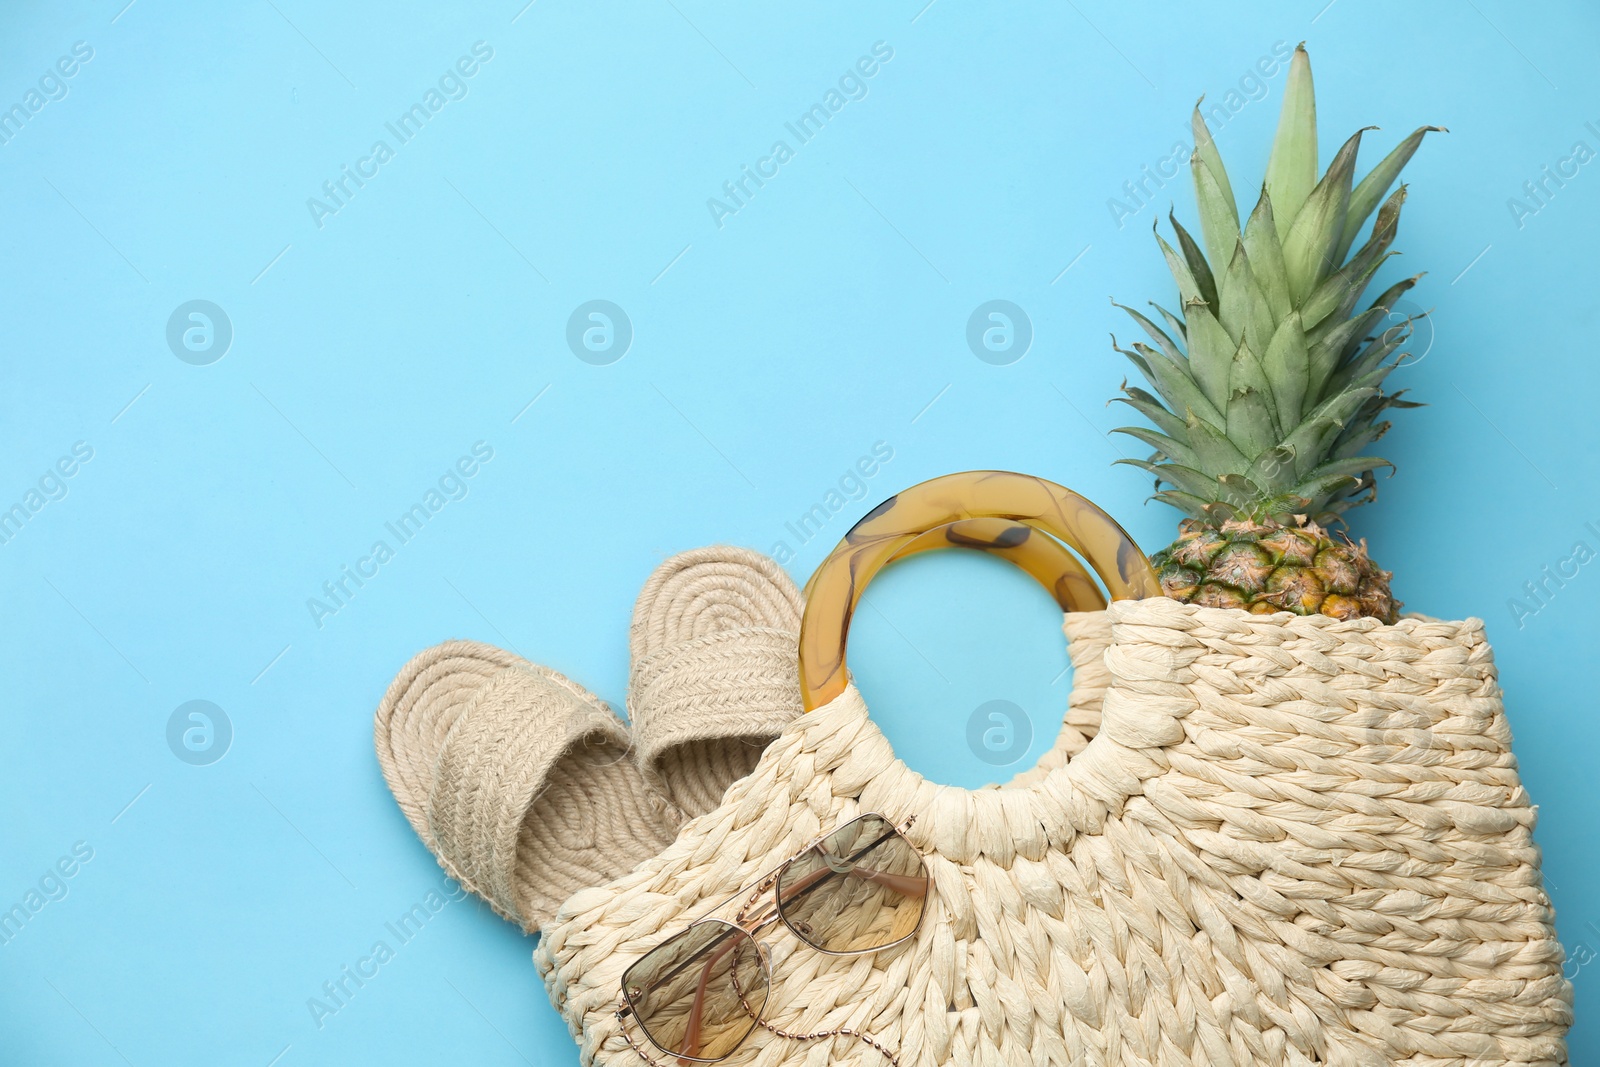 Photo of Elegant woman's straw bag with shoes, sunglasses and pineapple on light blue background, top view. Space for text